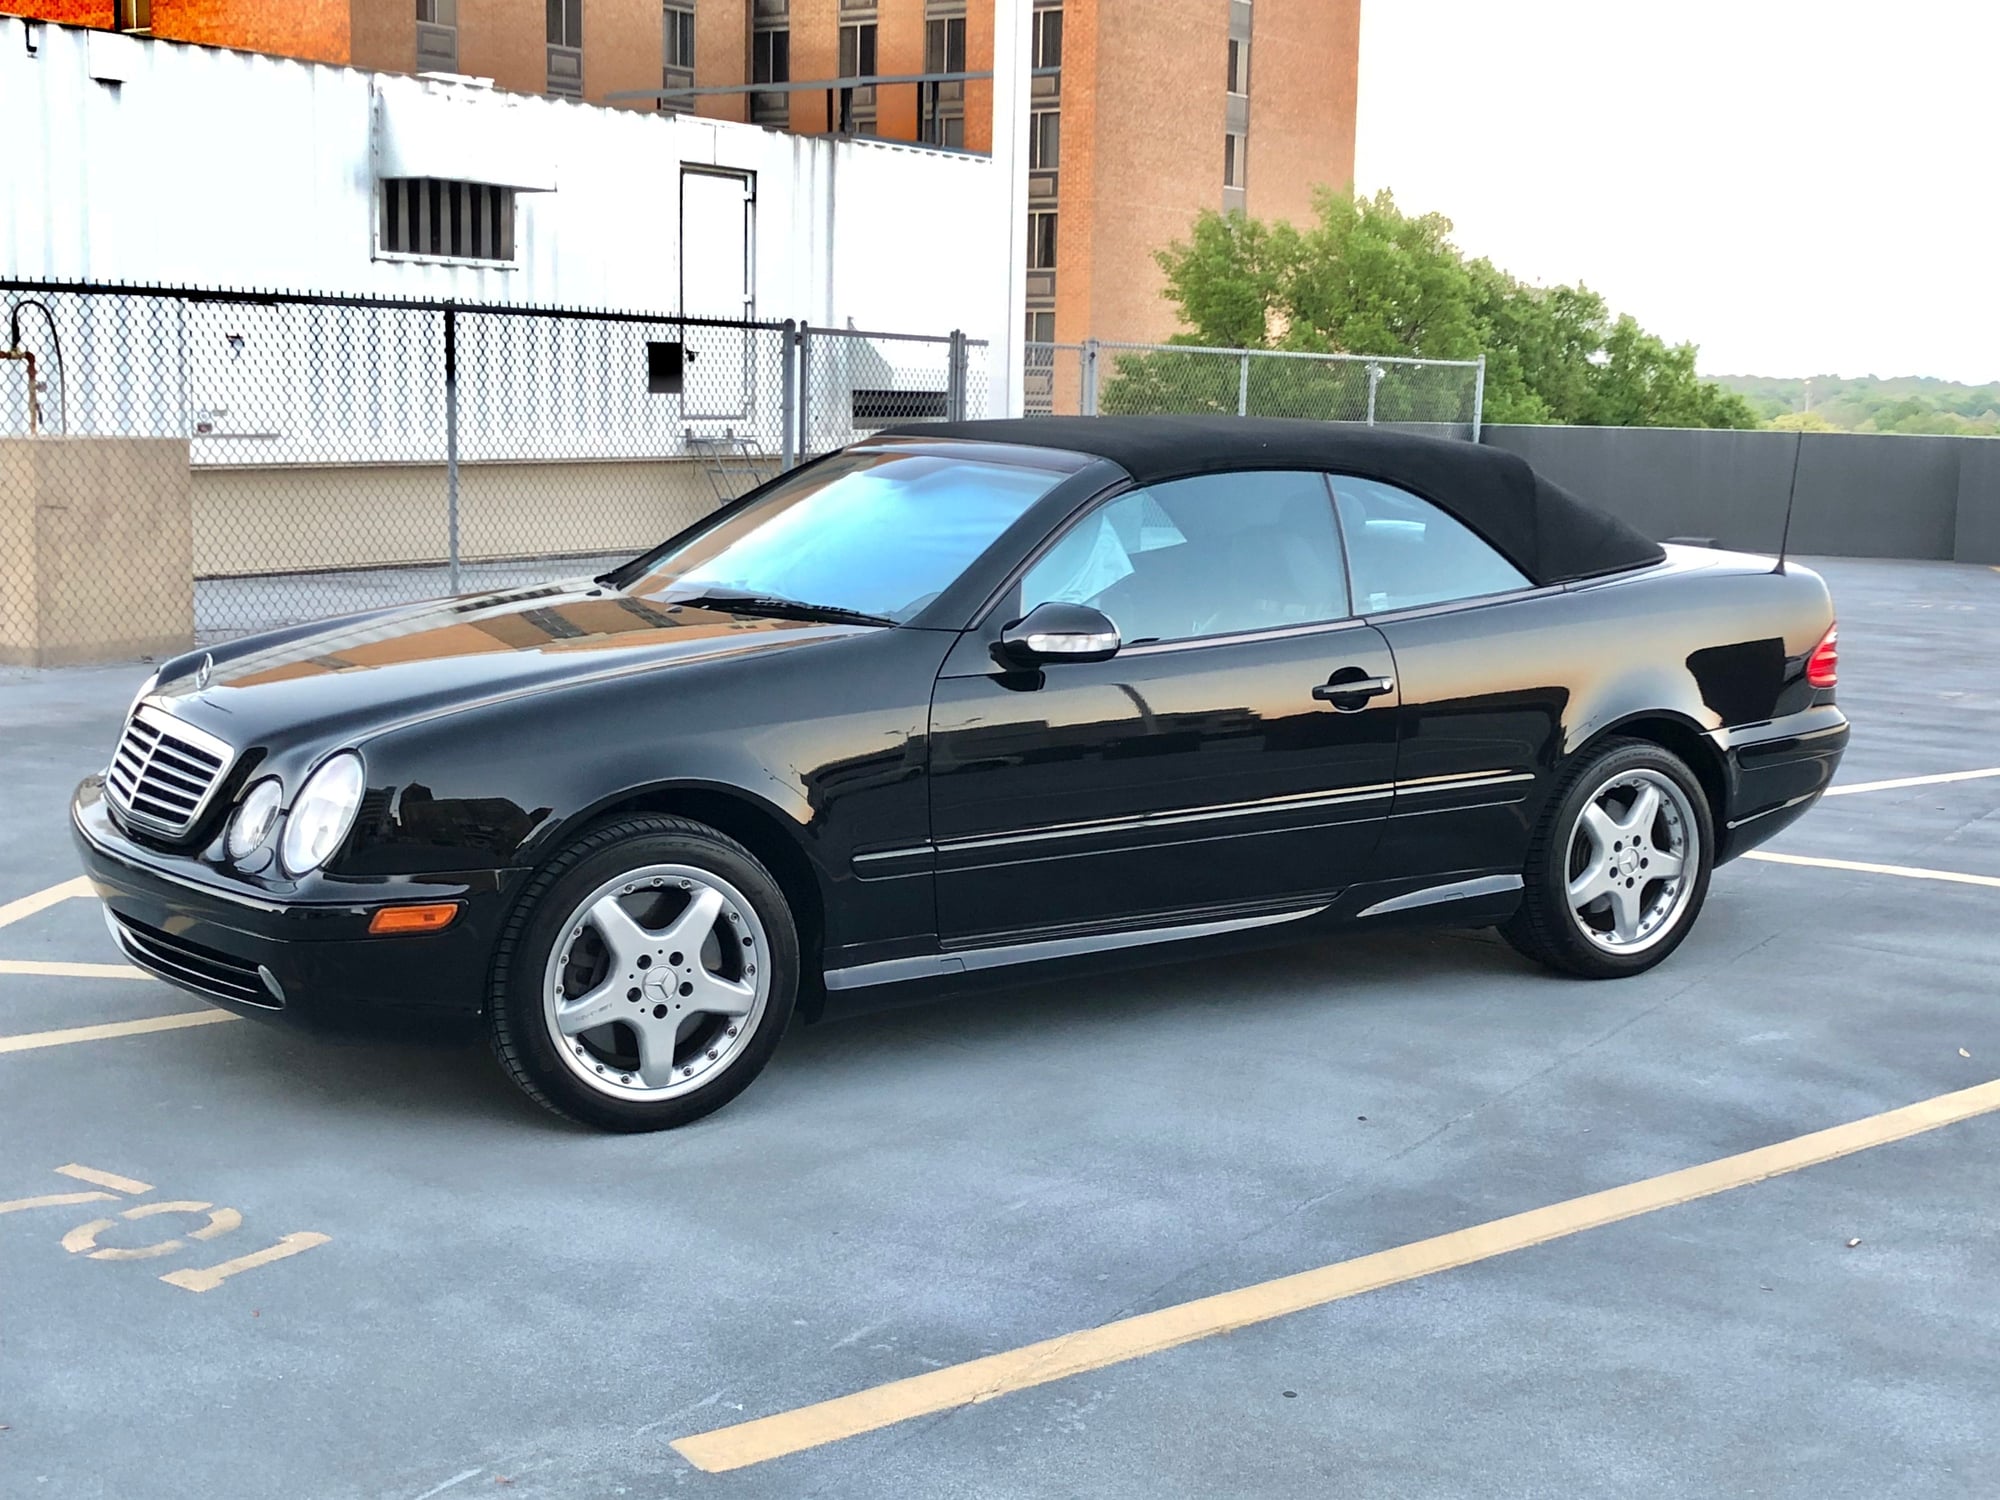 2002 Mercedes-Benz CLK55 AMG - Absolute Time Machine, (all original in like new condition) - Used - VIN WDBLK74G42T118396 - 76,000 Miles - 8 cyl - 2WD - Automatic - Convertible - Black - Atlanta, GA 30308, United States